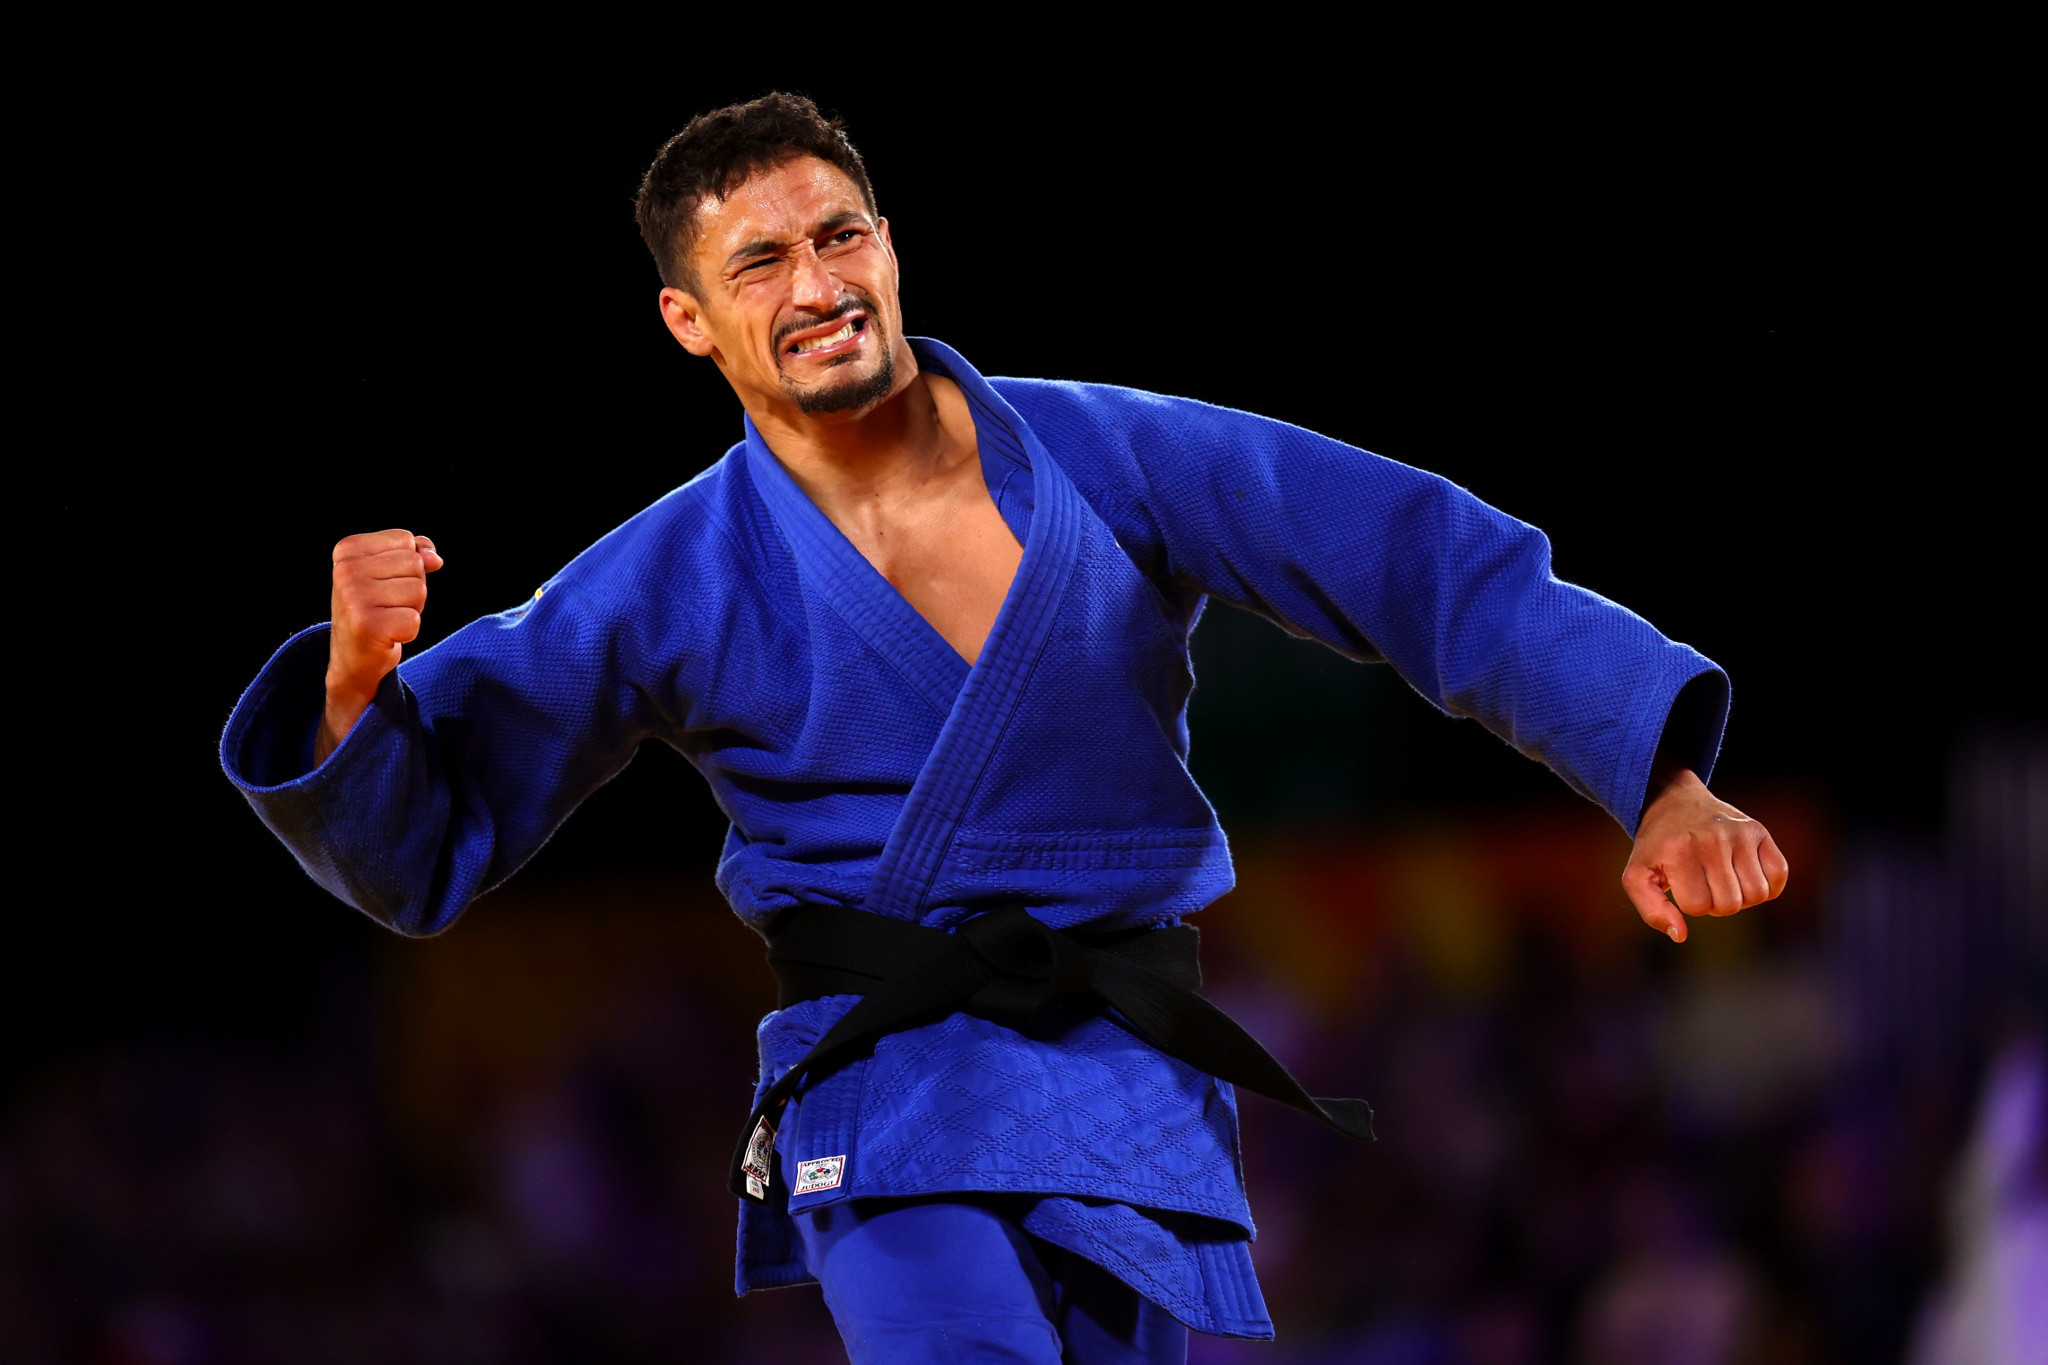 Ashley McKenzie is an English defending champion like Willstrop - but defending an under-60kg judo title won at Glasgow 2014 - and defend it he did ©Getty Images